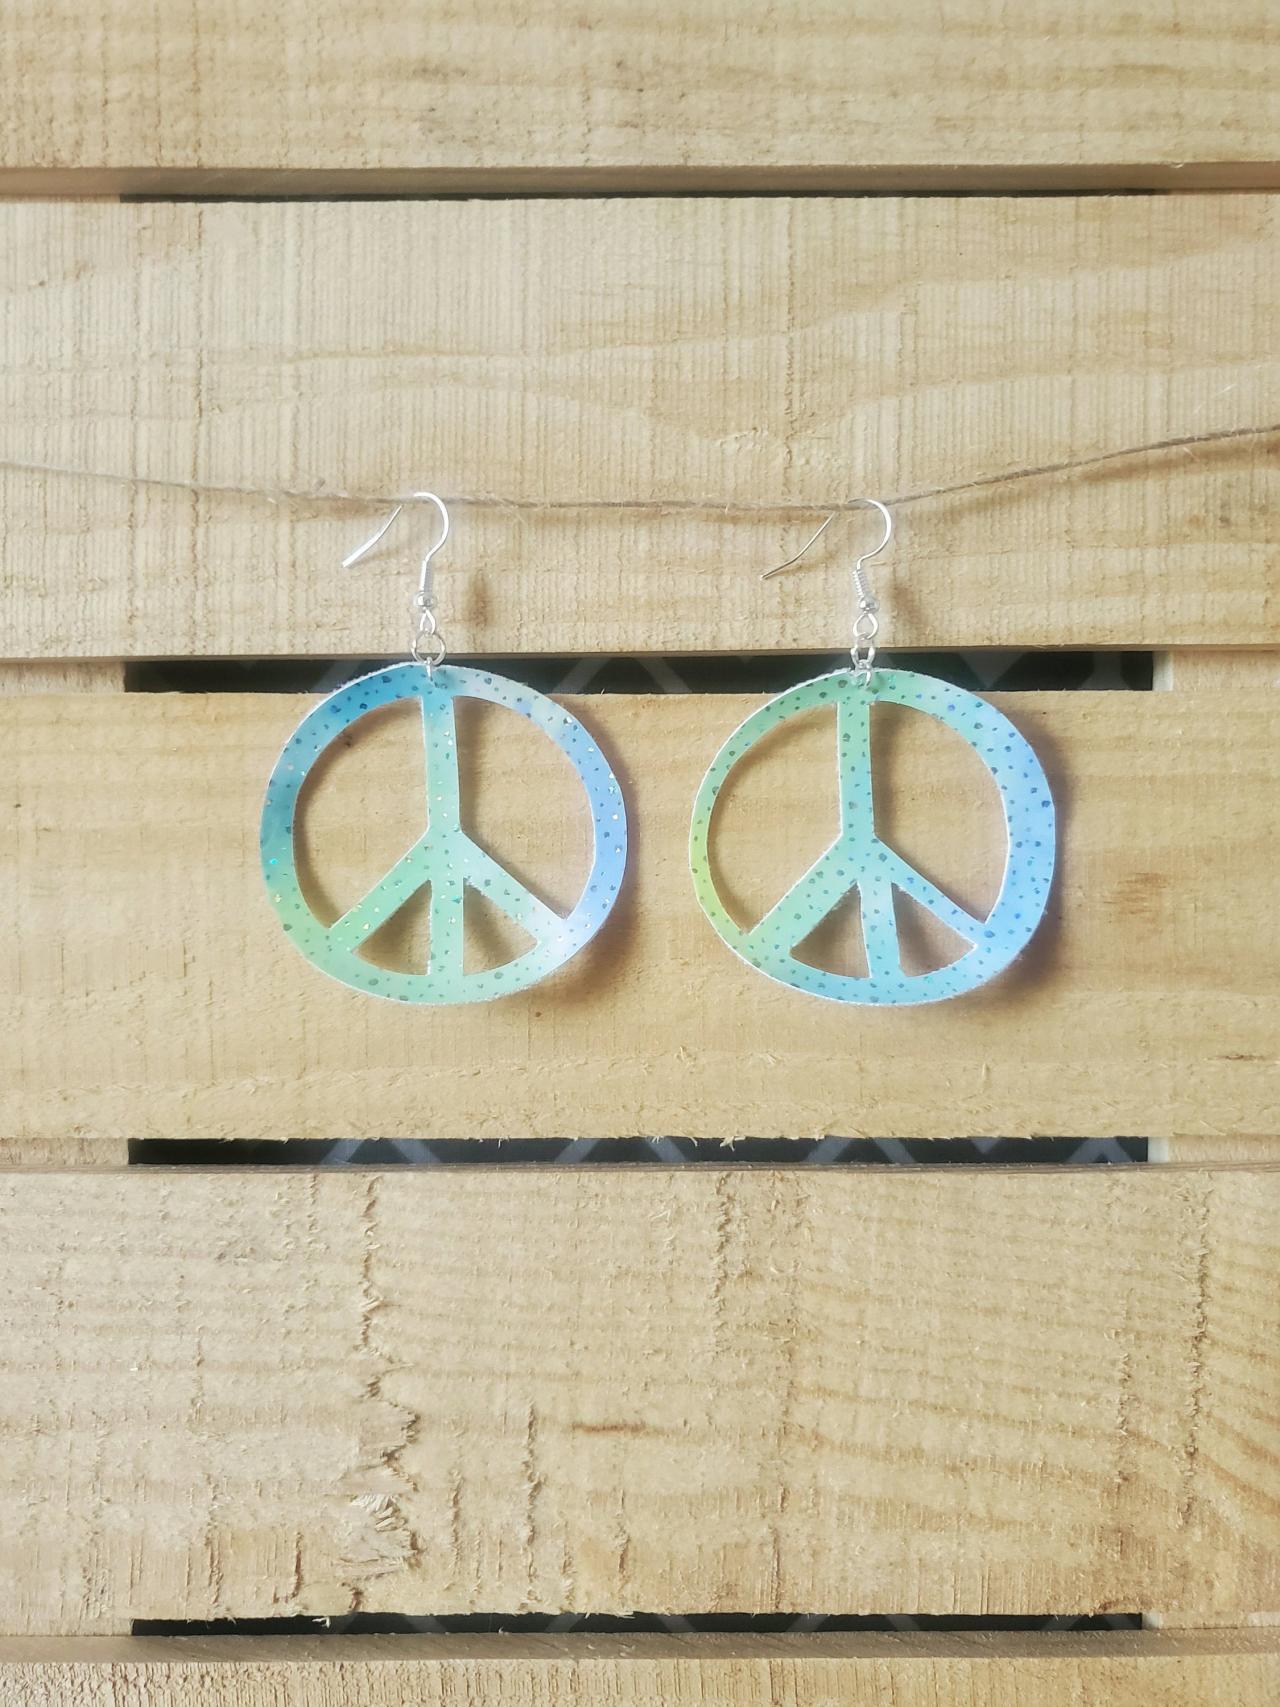 Blue Peace Leather Earrings, Bright Leather Earrings, Rainbow Leather Jewelry, Hippie Earrings, Peace Sign Jewelry, Boho Chic Earrings